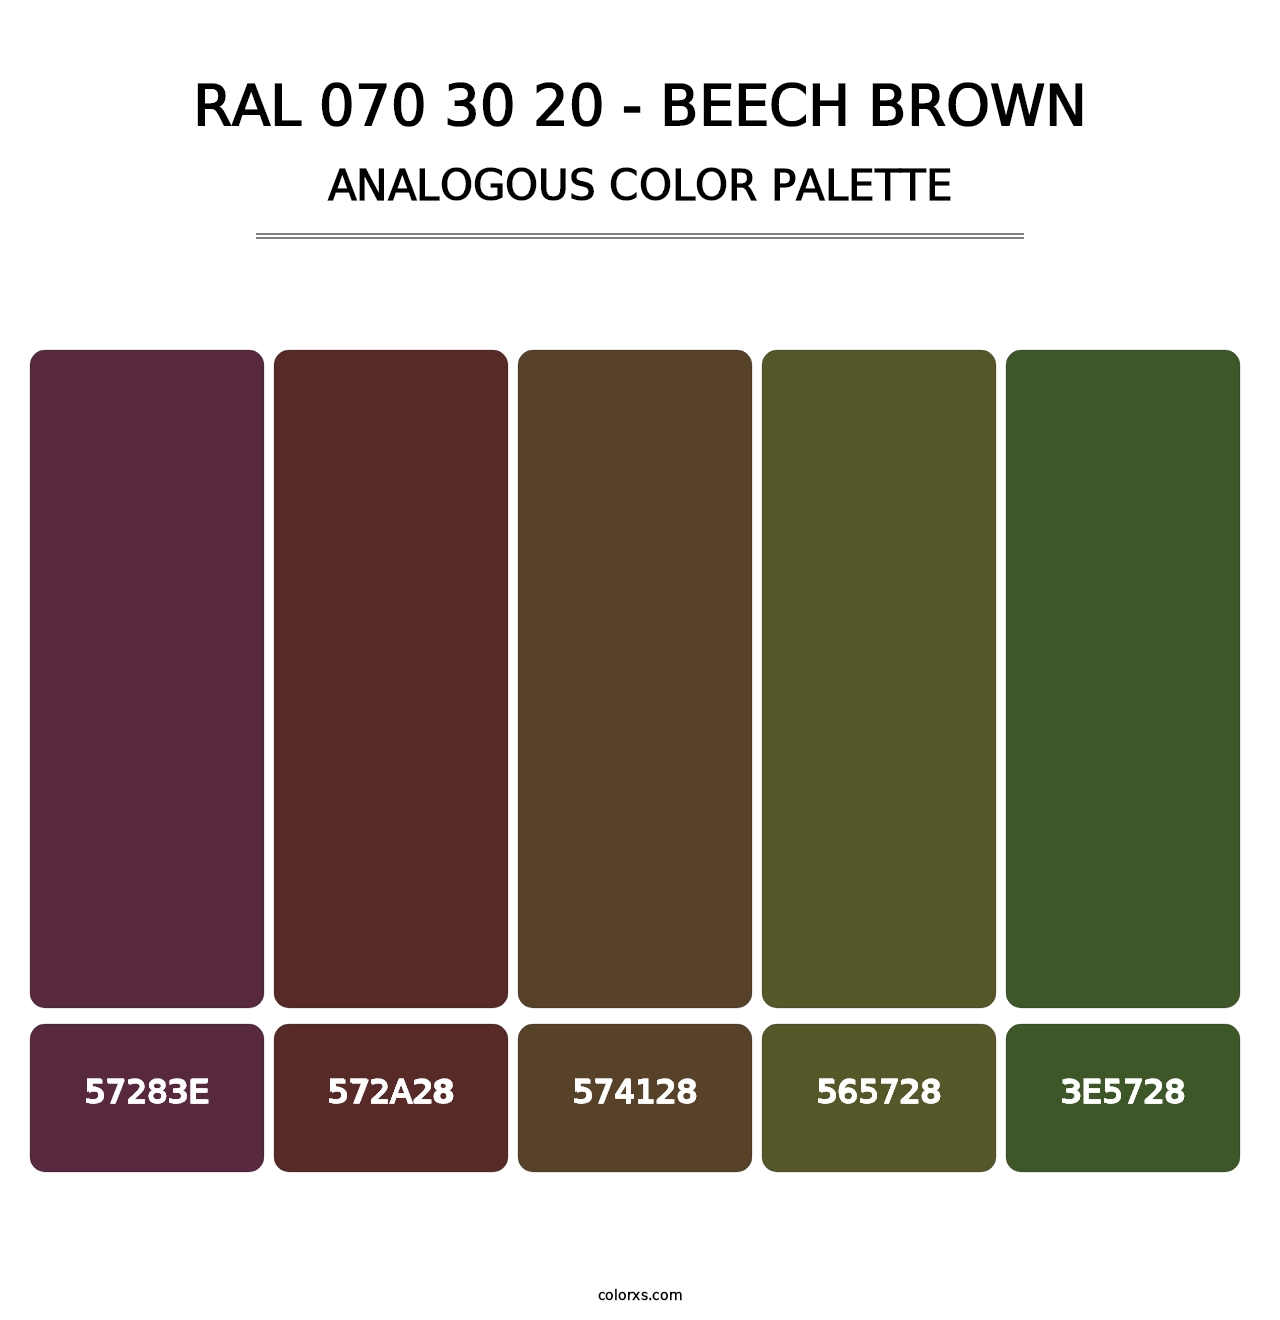 RAL 070 30 20 - Beech Brown - Analogous Color Palette